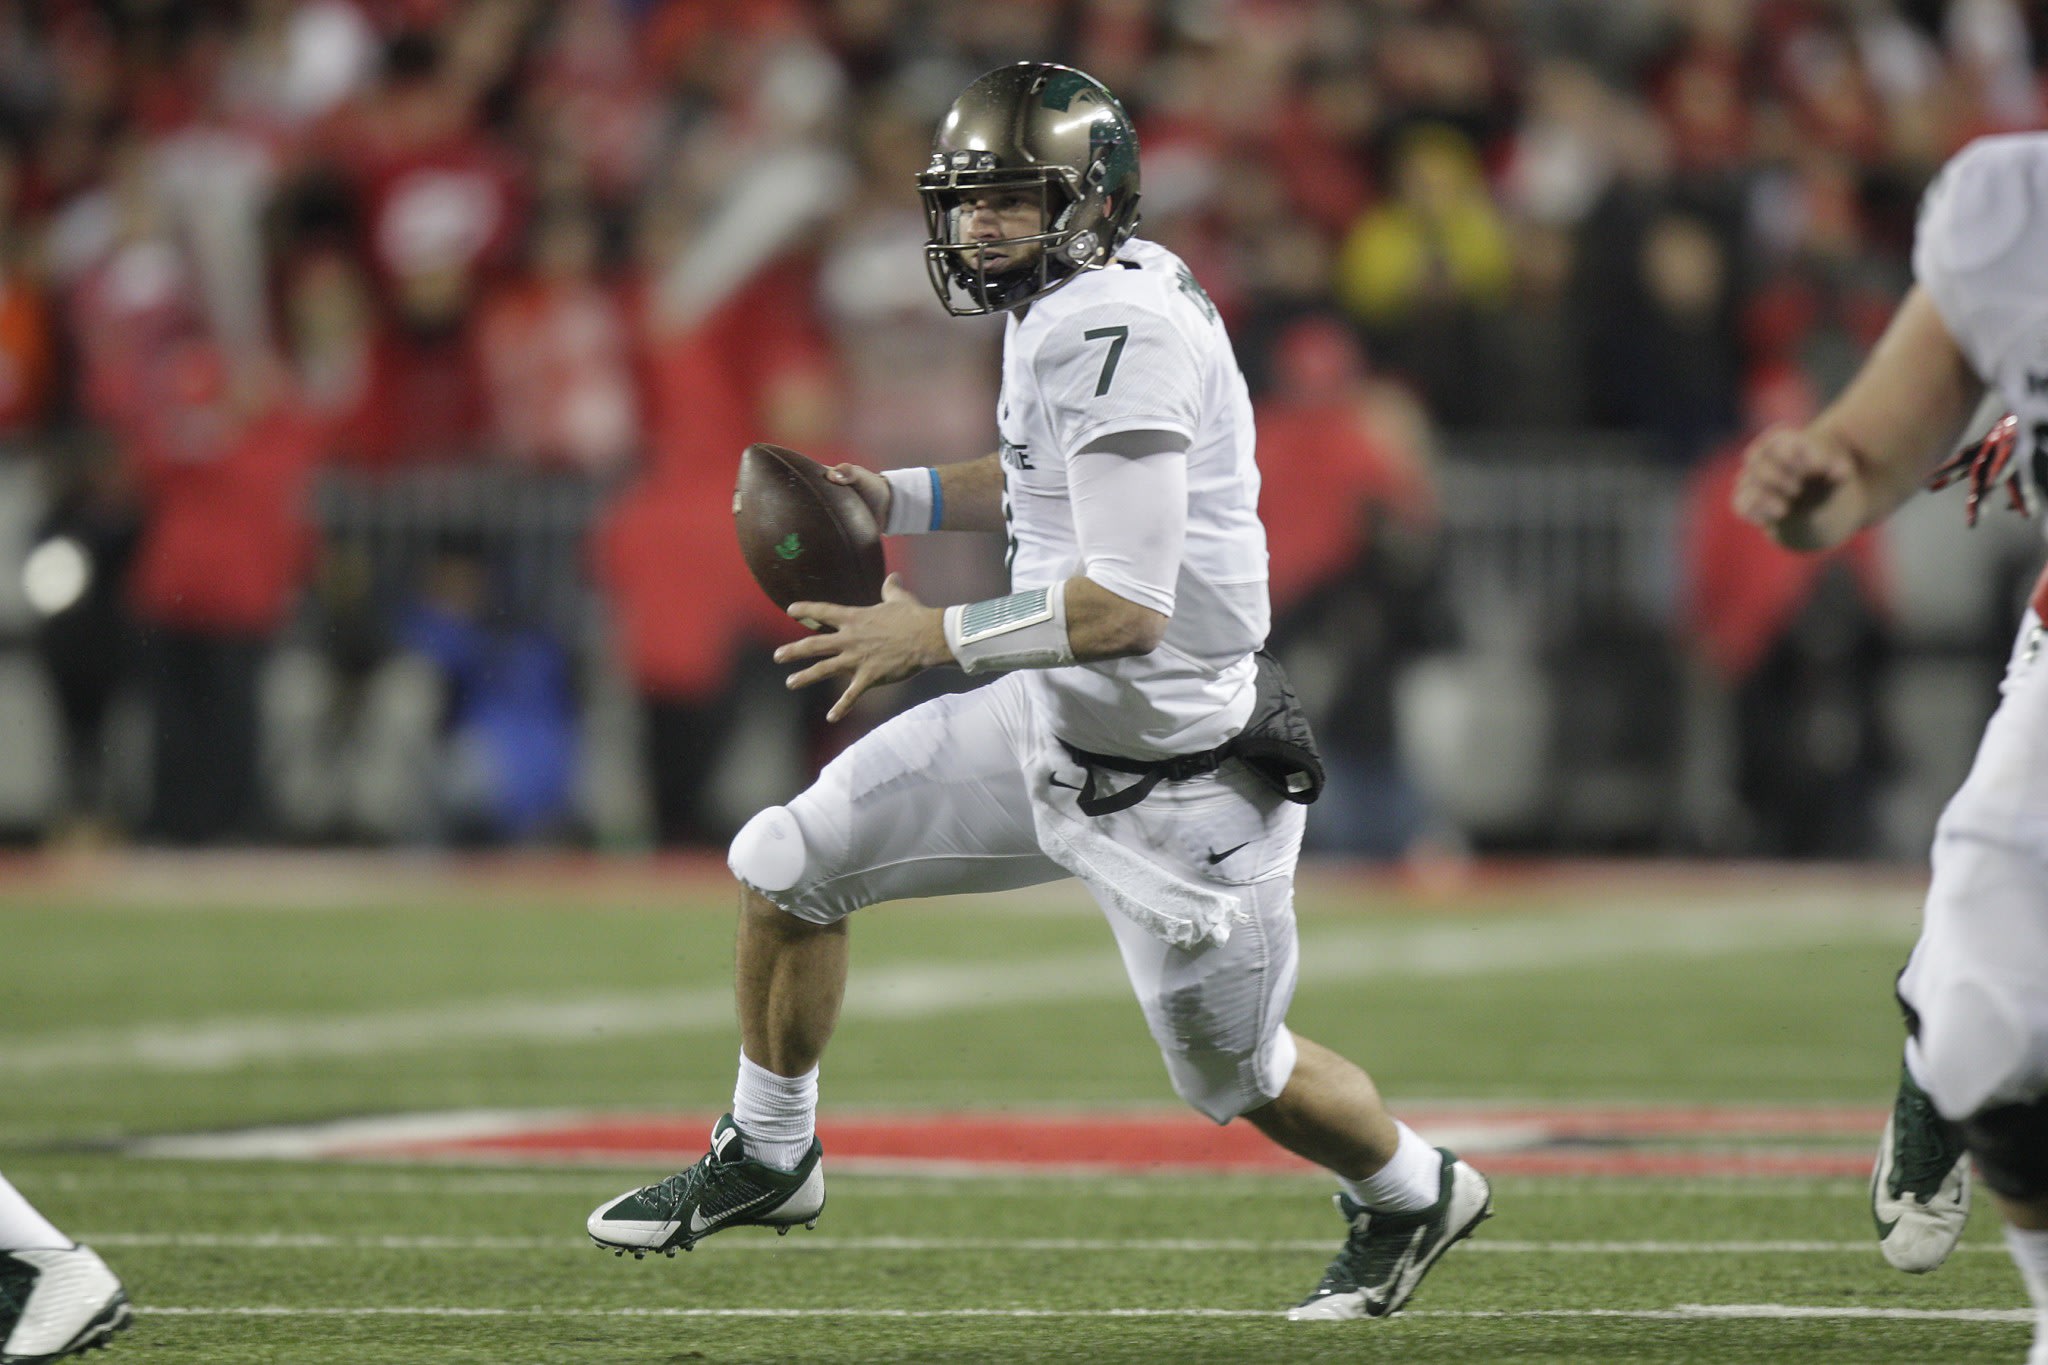 Tyler O'Connor led Michigan State to a win over Ohio State in Columbus. (AP Photo/Jay LaPrete)